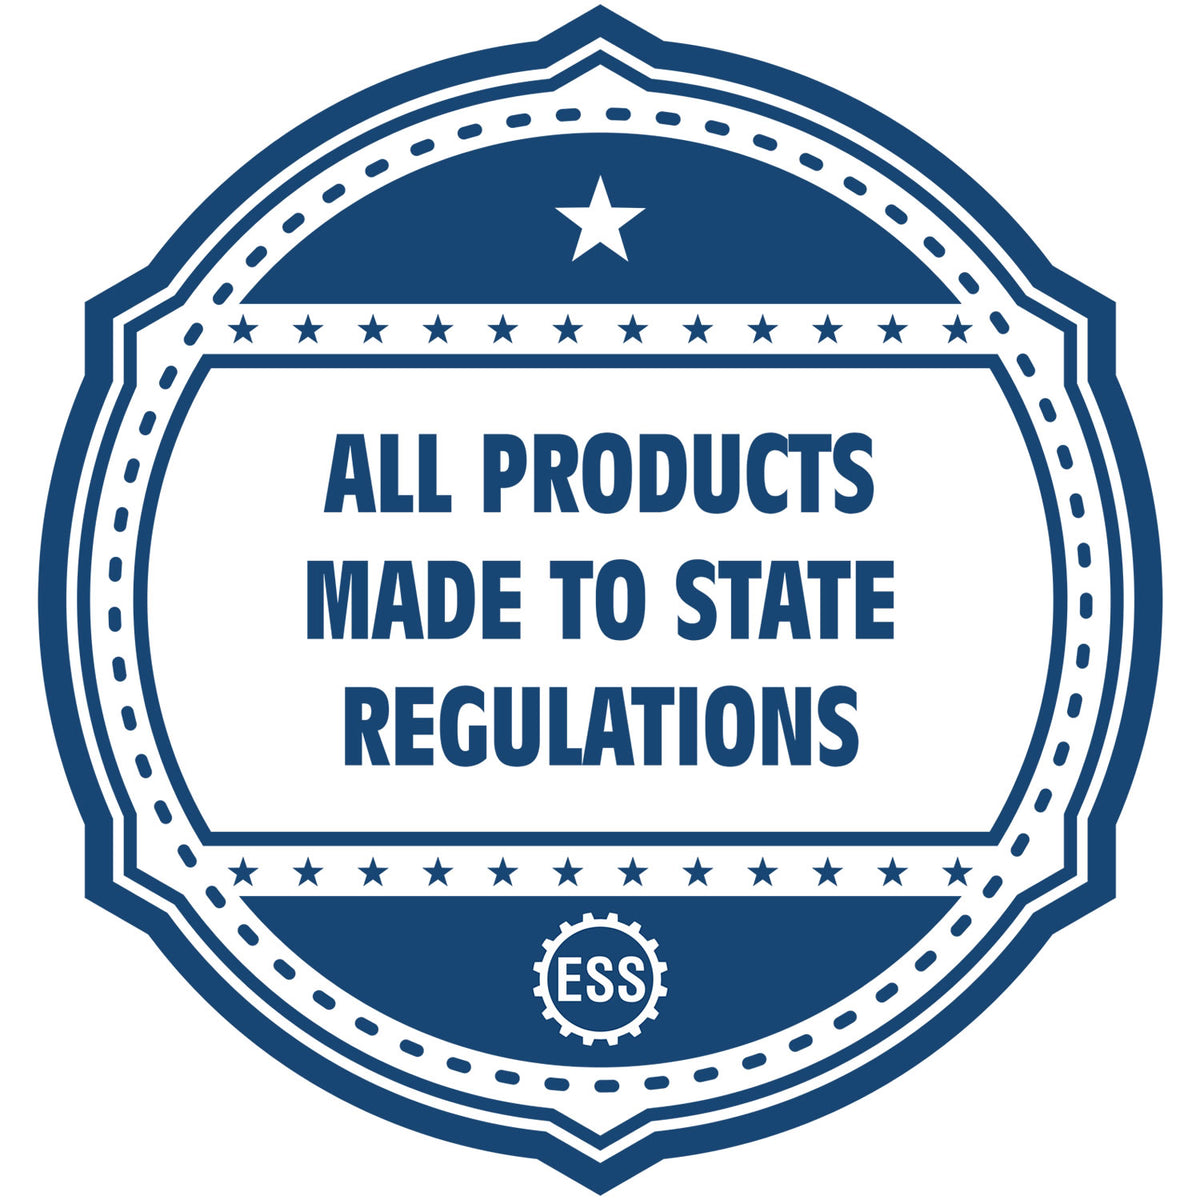 An icon or badge element for the Self-Inking Alabama Landscape Architect Stamp showing that this product is made in compliance with state regulations.